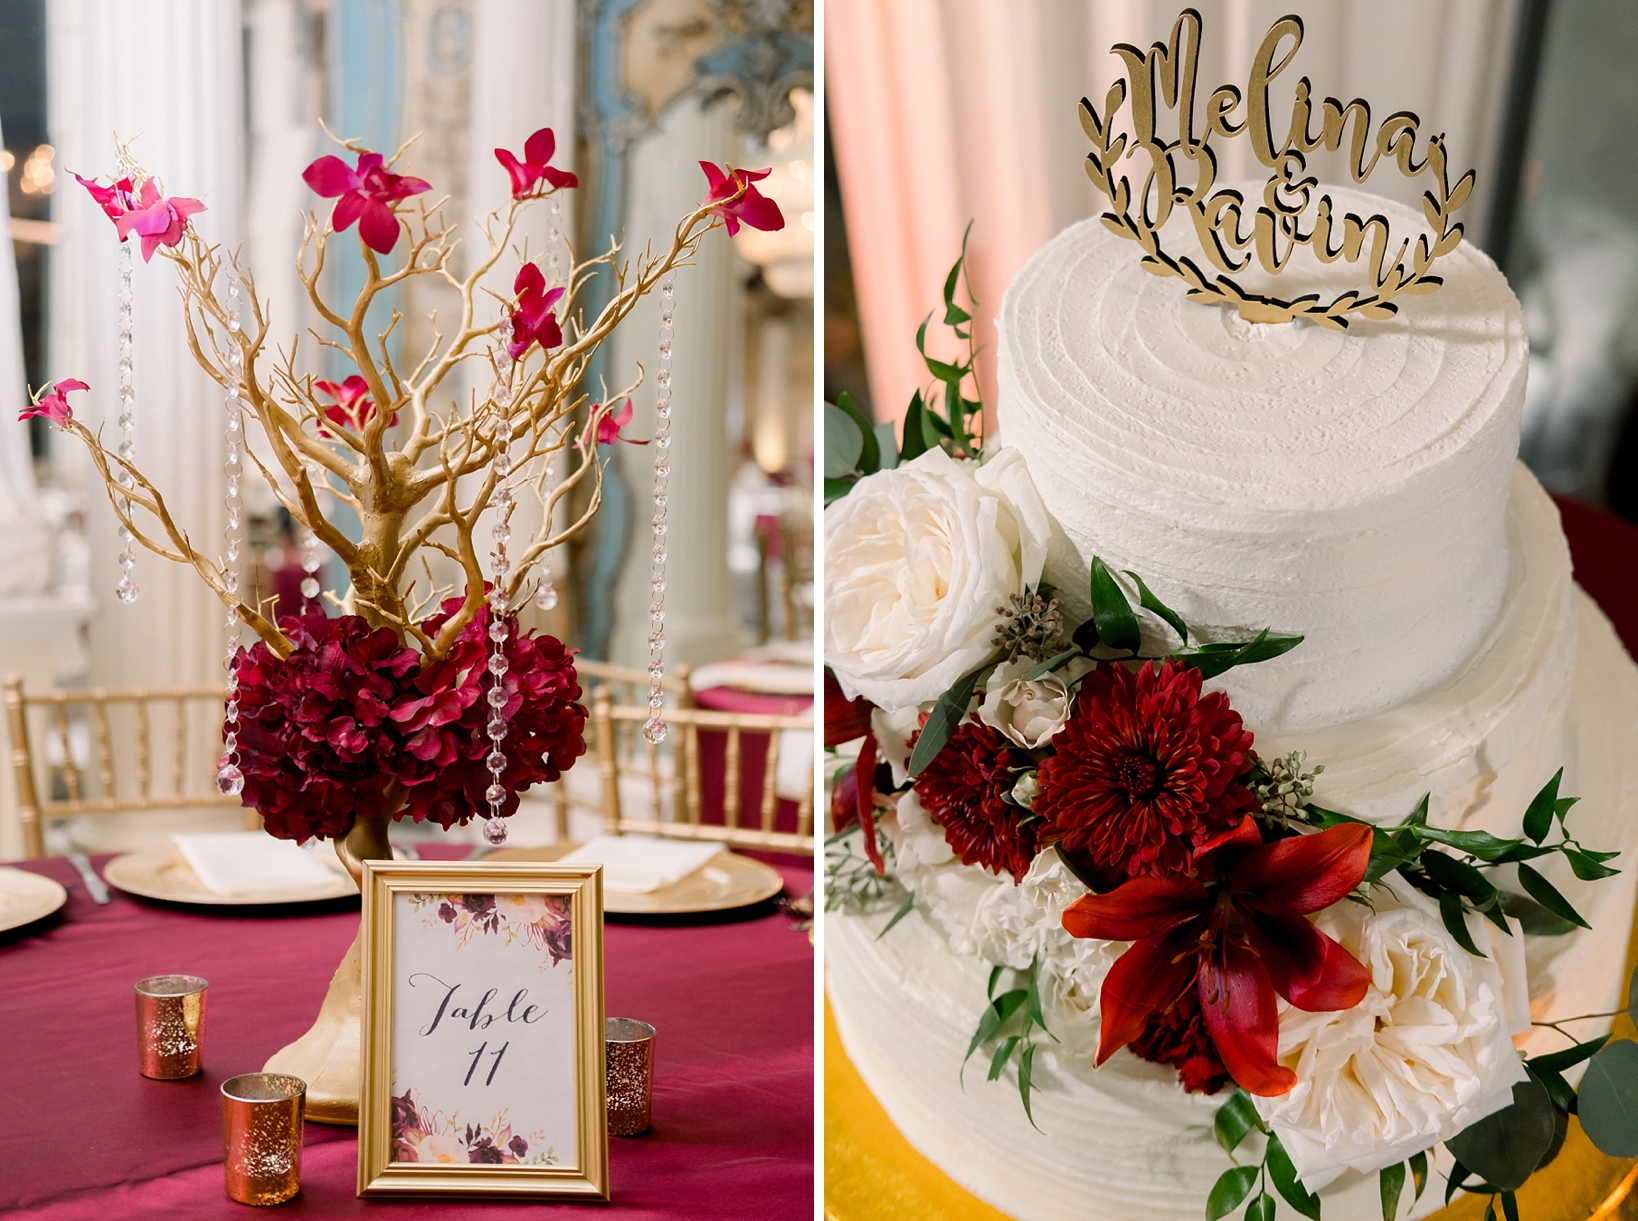 Some floral and crystal decor details and the wedding cake close up by Sarah & Ben Photography